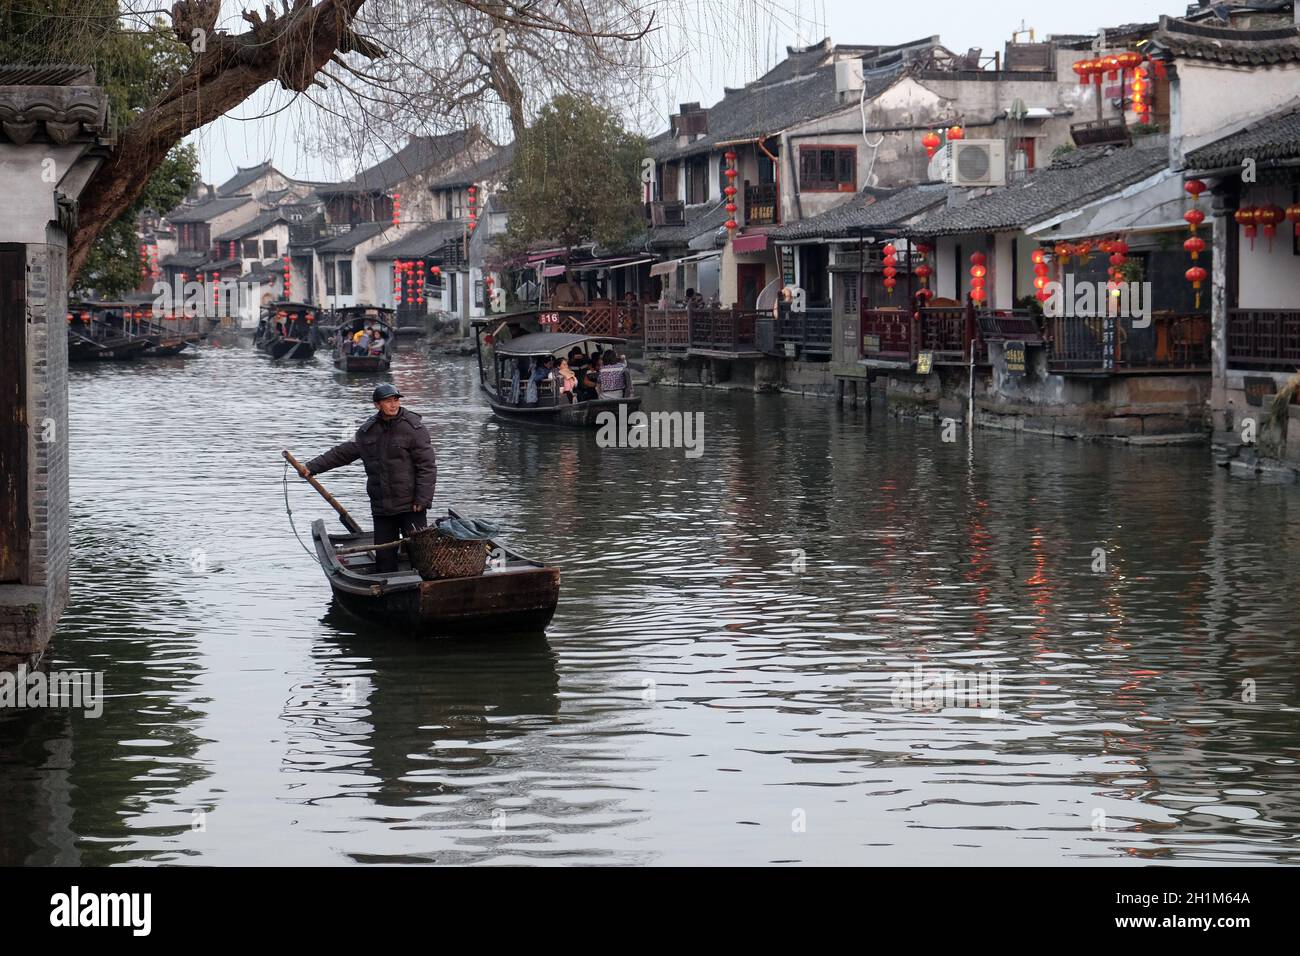 Tourist boats on the water canals of Xitang Town in Zhejiang Province, China Stock Photo